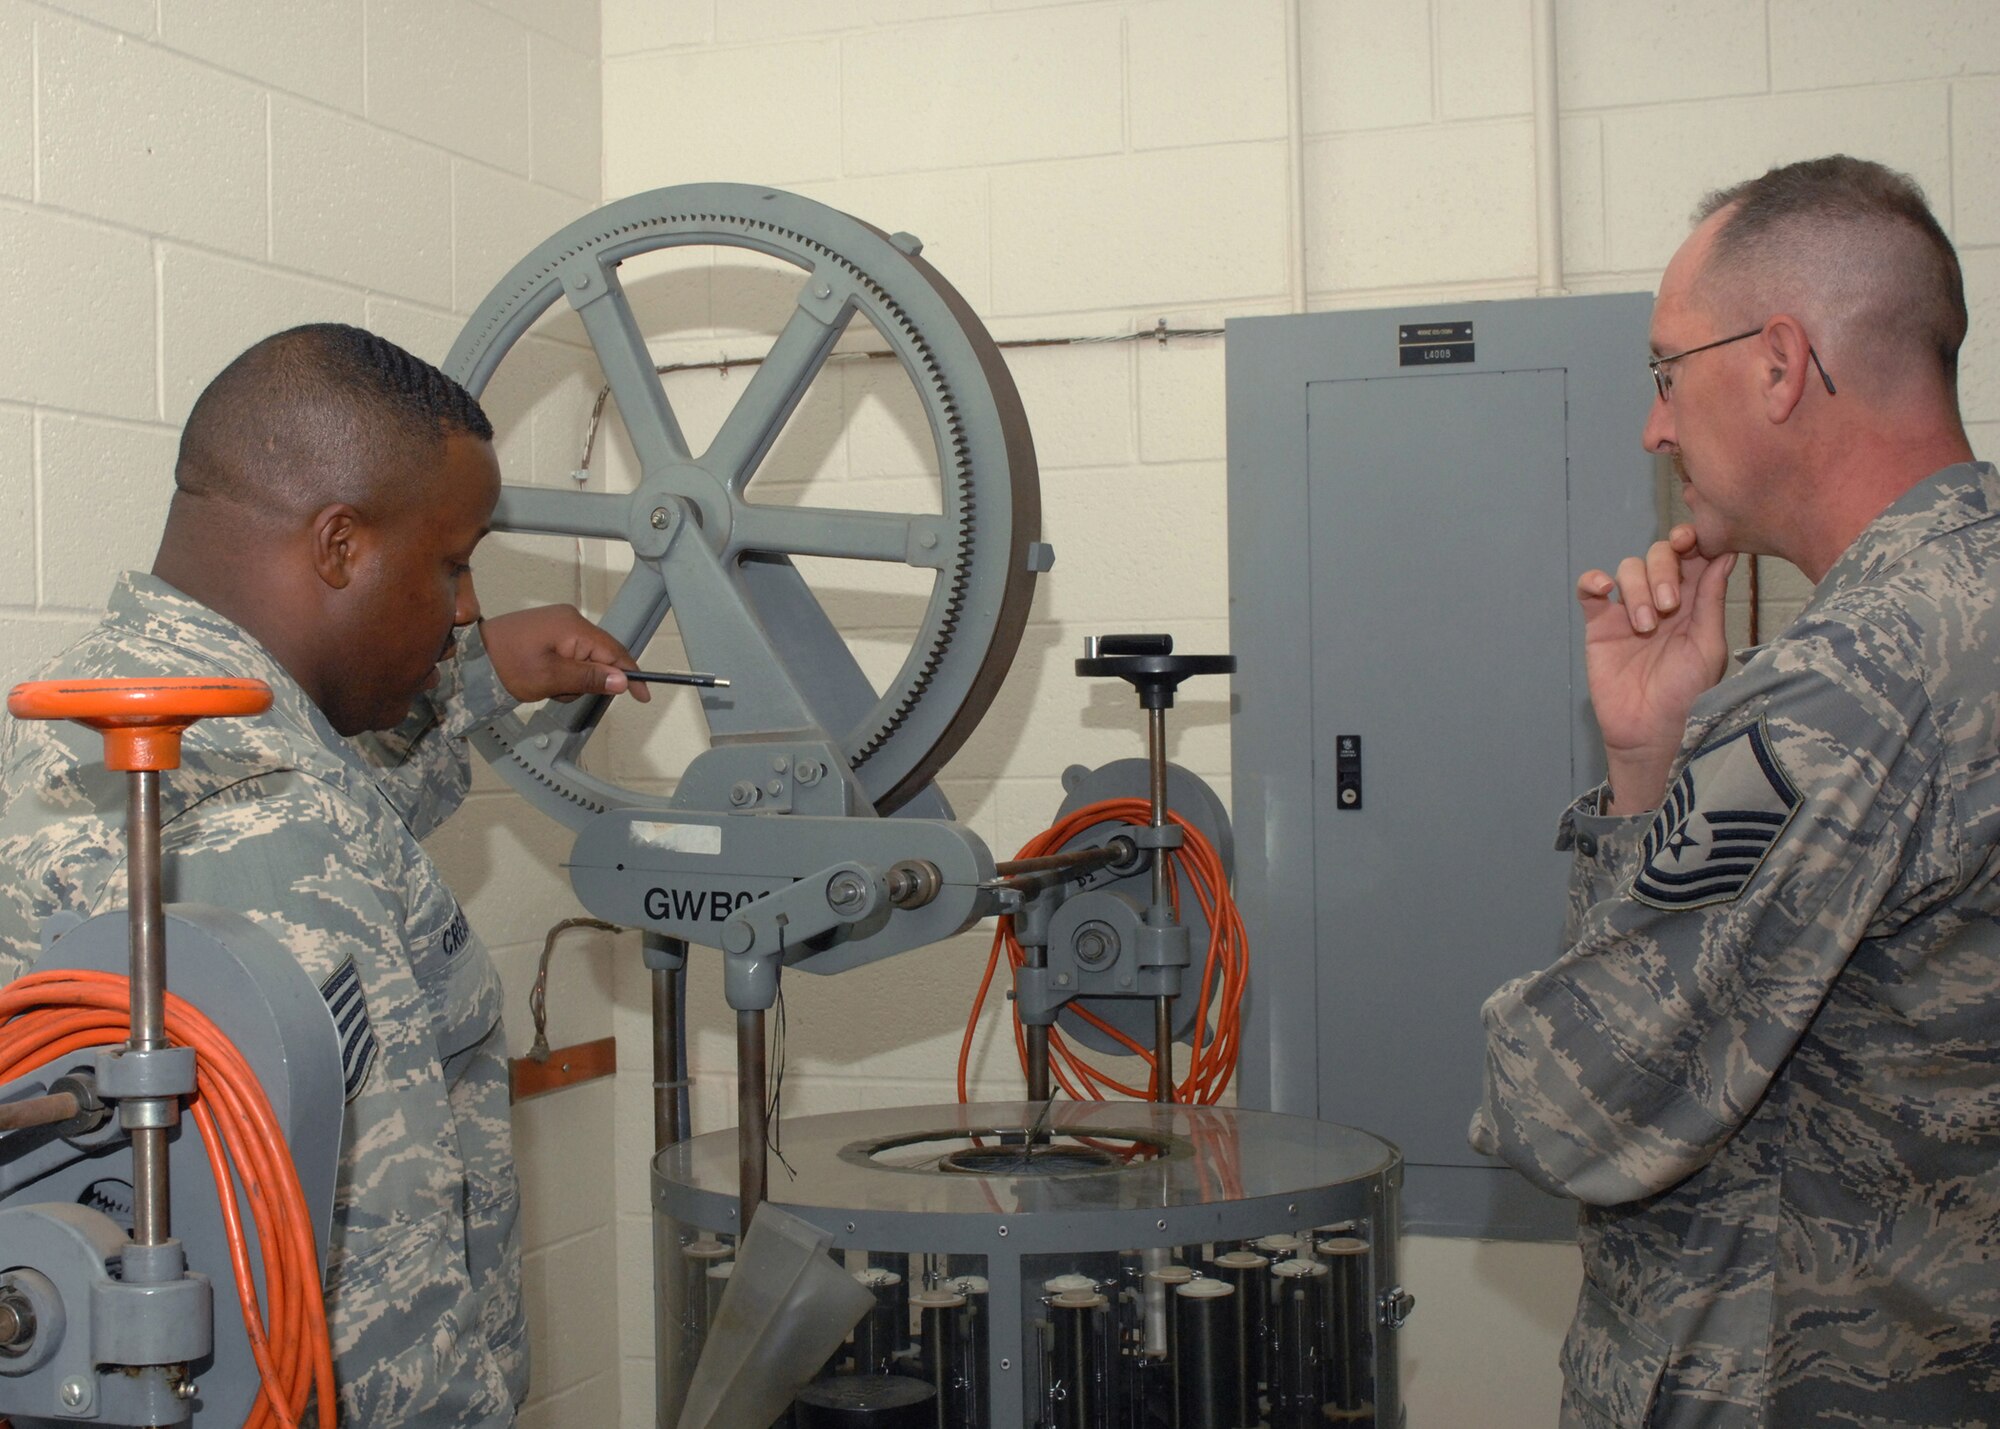 CANNON AIR FORCE BASE N.M. -- Tech. Sgt. Kent Creamer, 27th Special Operations Component Maintenance Squadron, shows Master Sgt. William Keely, 27th Special Operations Wing Safety Office, how the wire braiding machine operates. Volunteer Protection Program members, accompanied by Sergeant Keely, visited Cannon Nov. 3-7 to look at protection features on current equipment being used by the 27th SOCMS shop to cut down on injury and incident mishaps. (U.S. Air Force photo by Airman 1st Class James R. Bell)